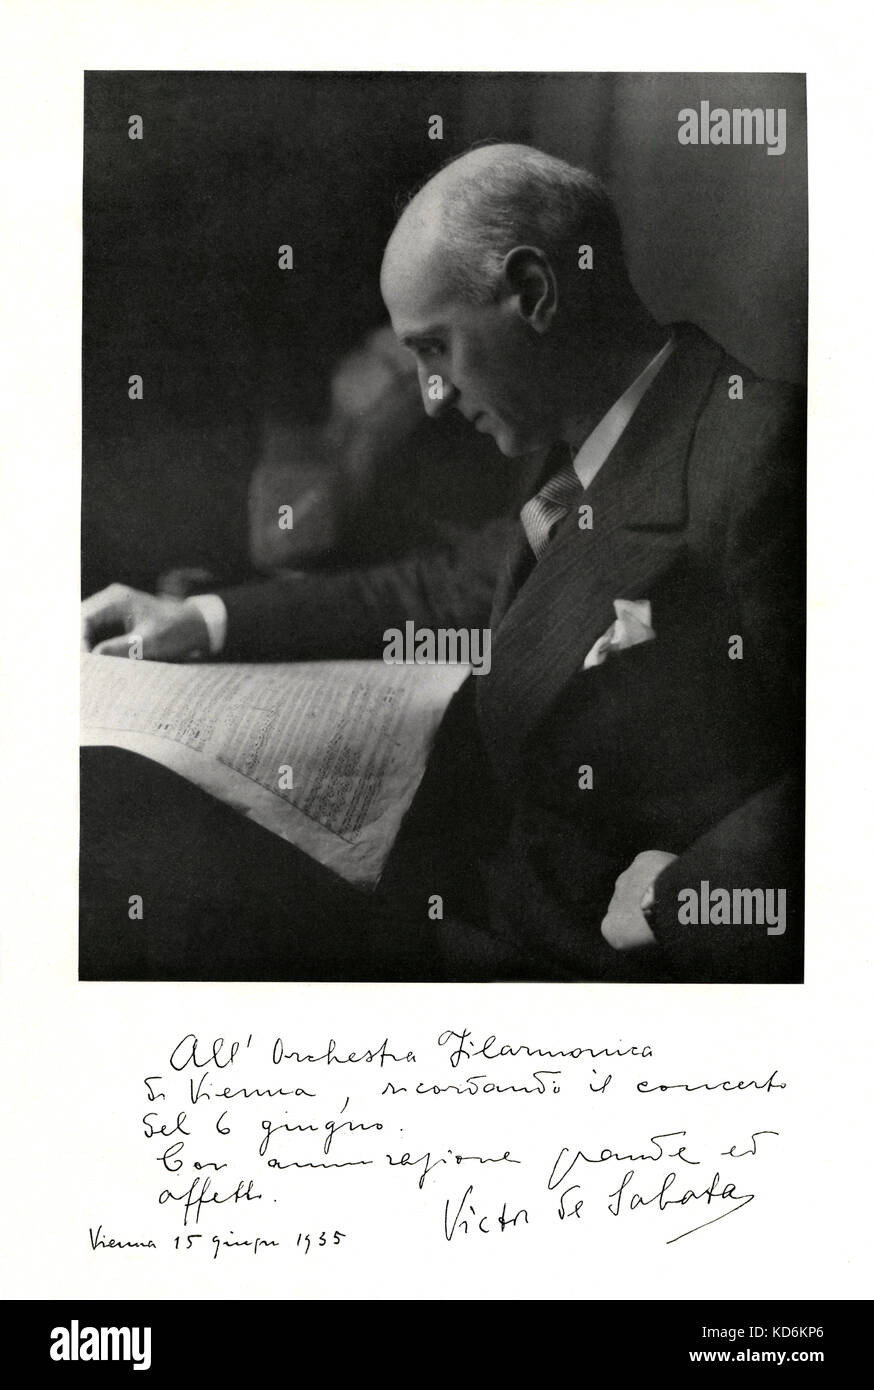 Victor de Sabata looking at score. With autograph to the Vienna Philharmonic Orchestra, signed 15 June 1935.  Italian conductor and composer, 1892-1967. Stock Photo